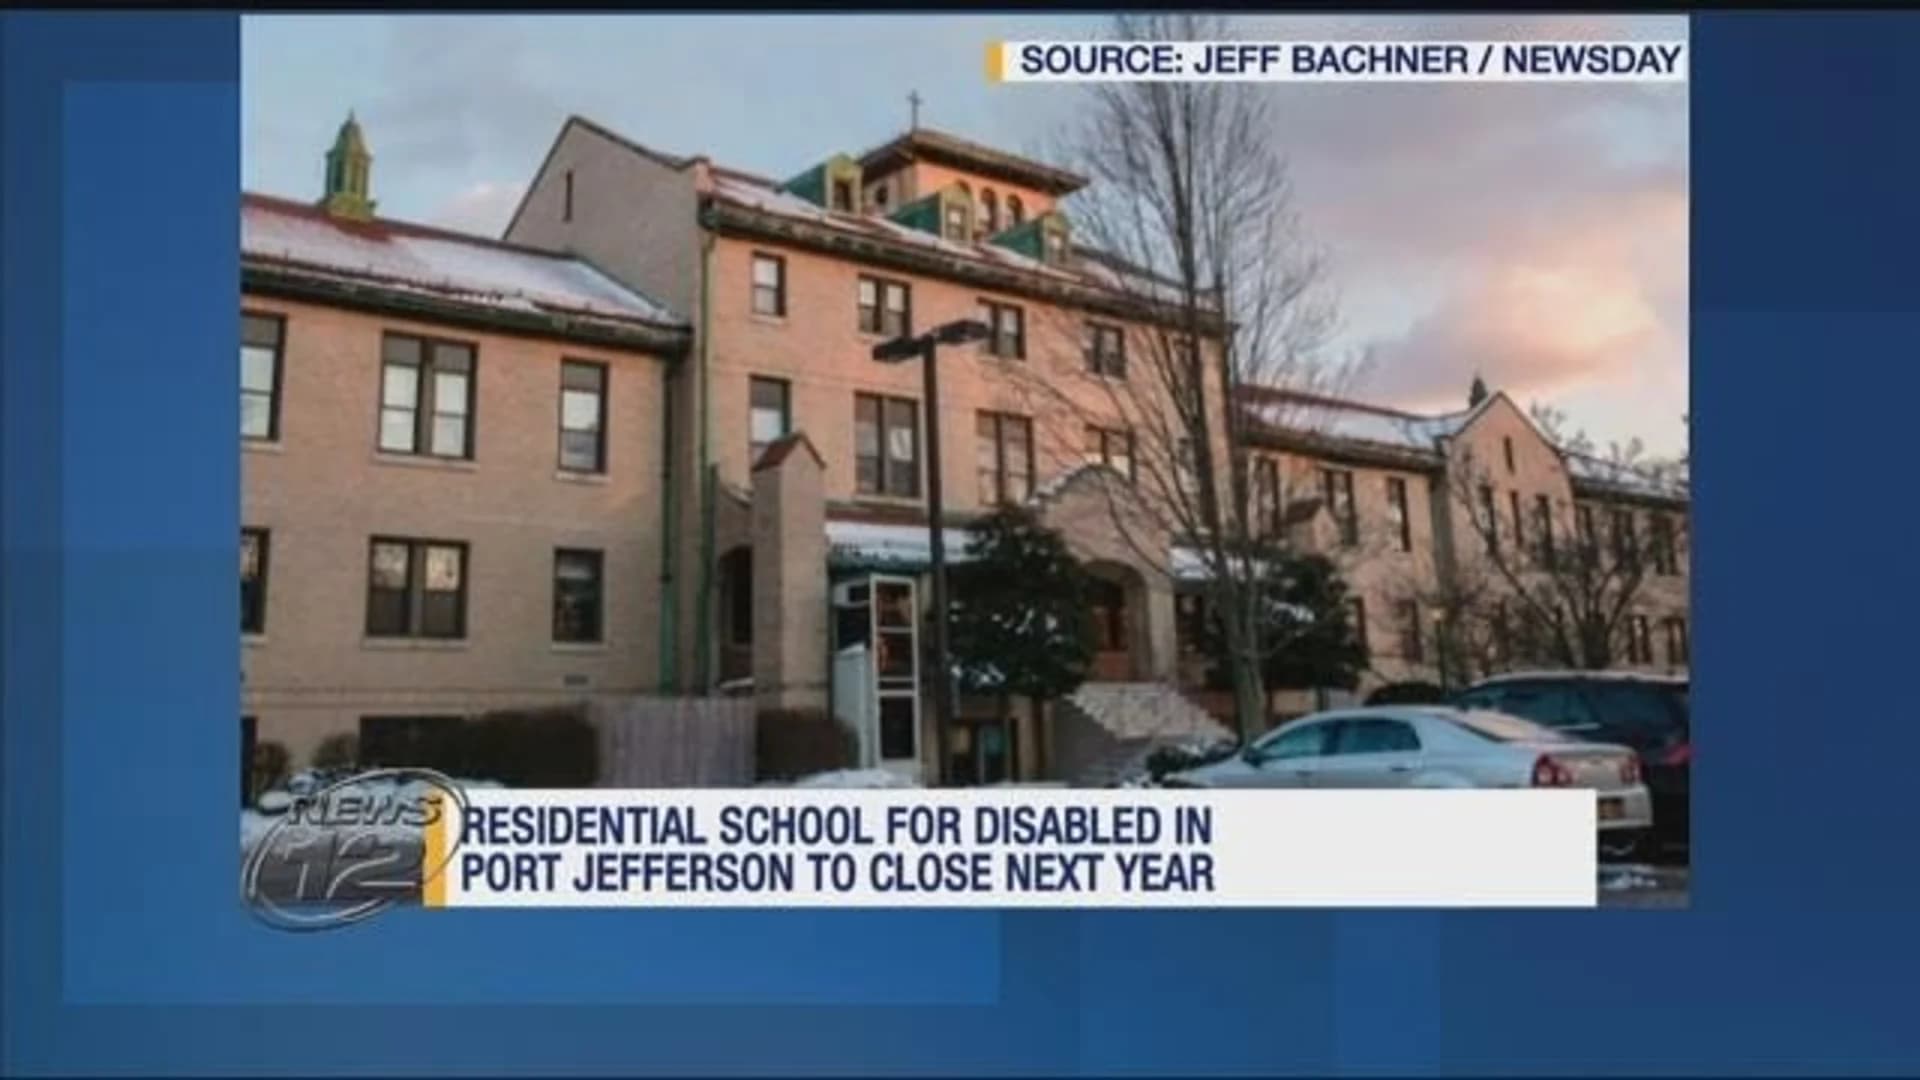 Residential school for disabled in Port Jefferson to close